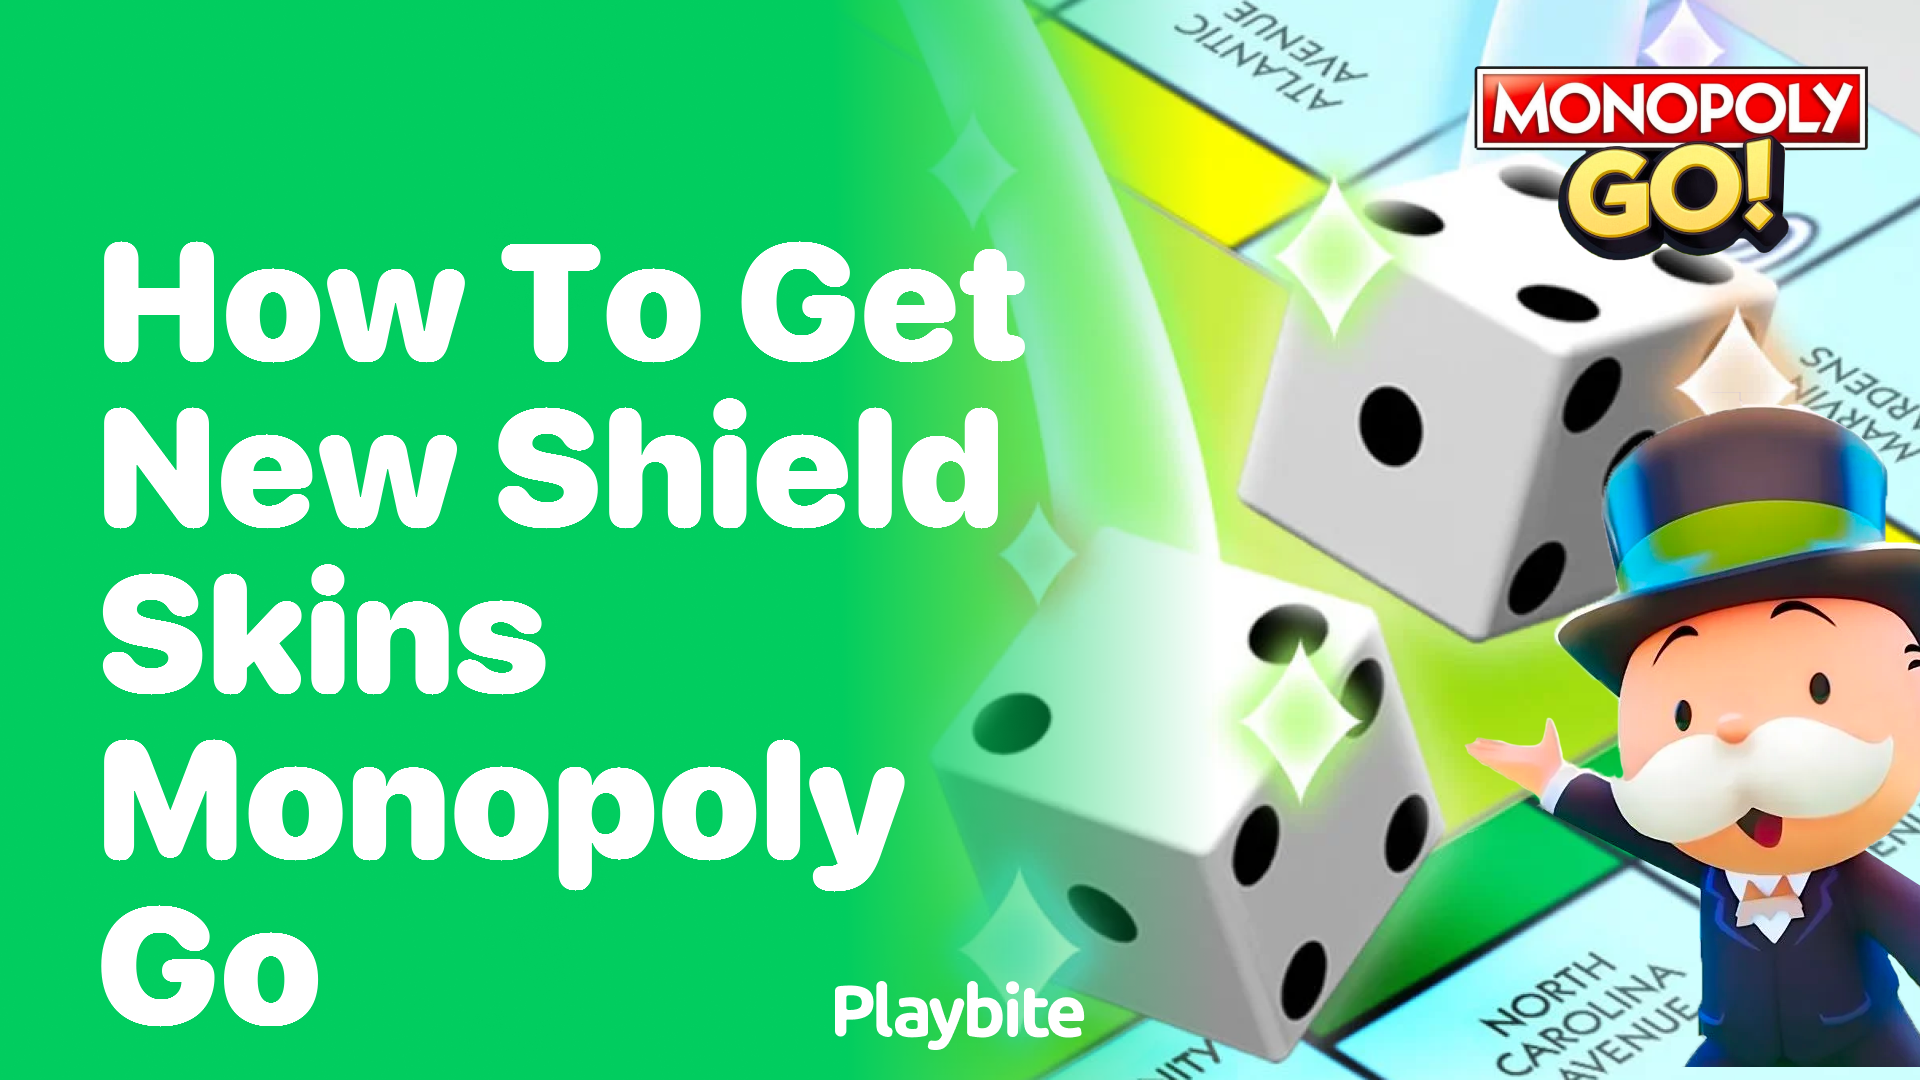 How to Get New Shield Skins in Monopoly Go